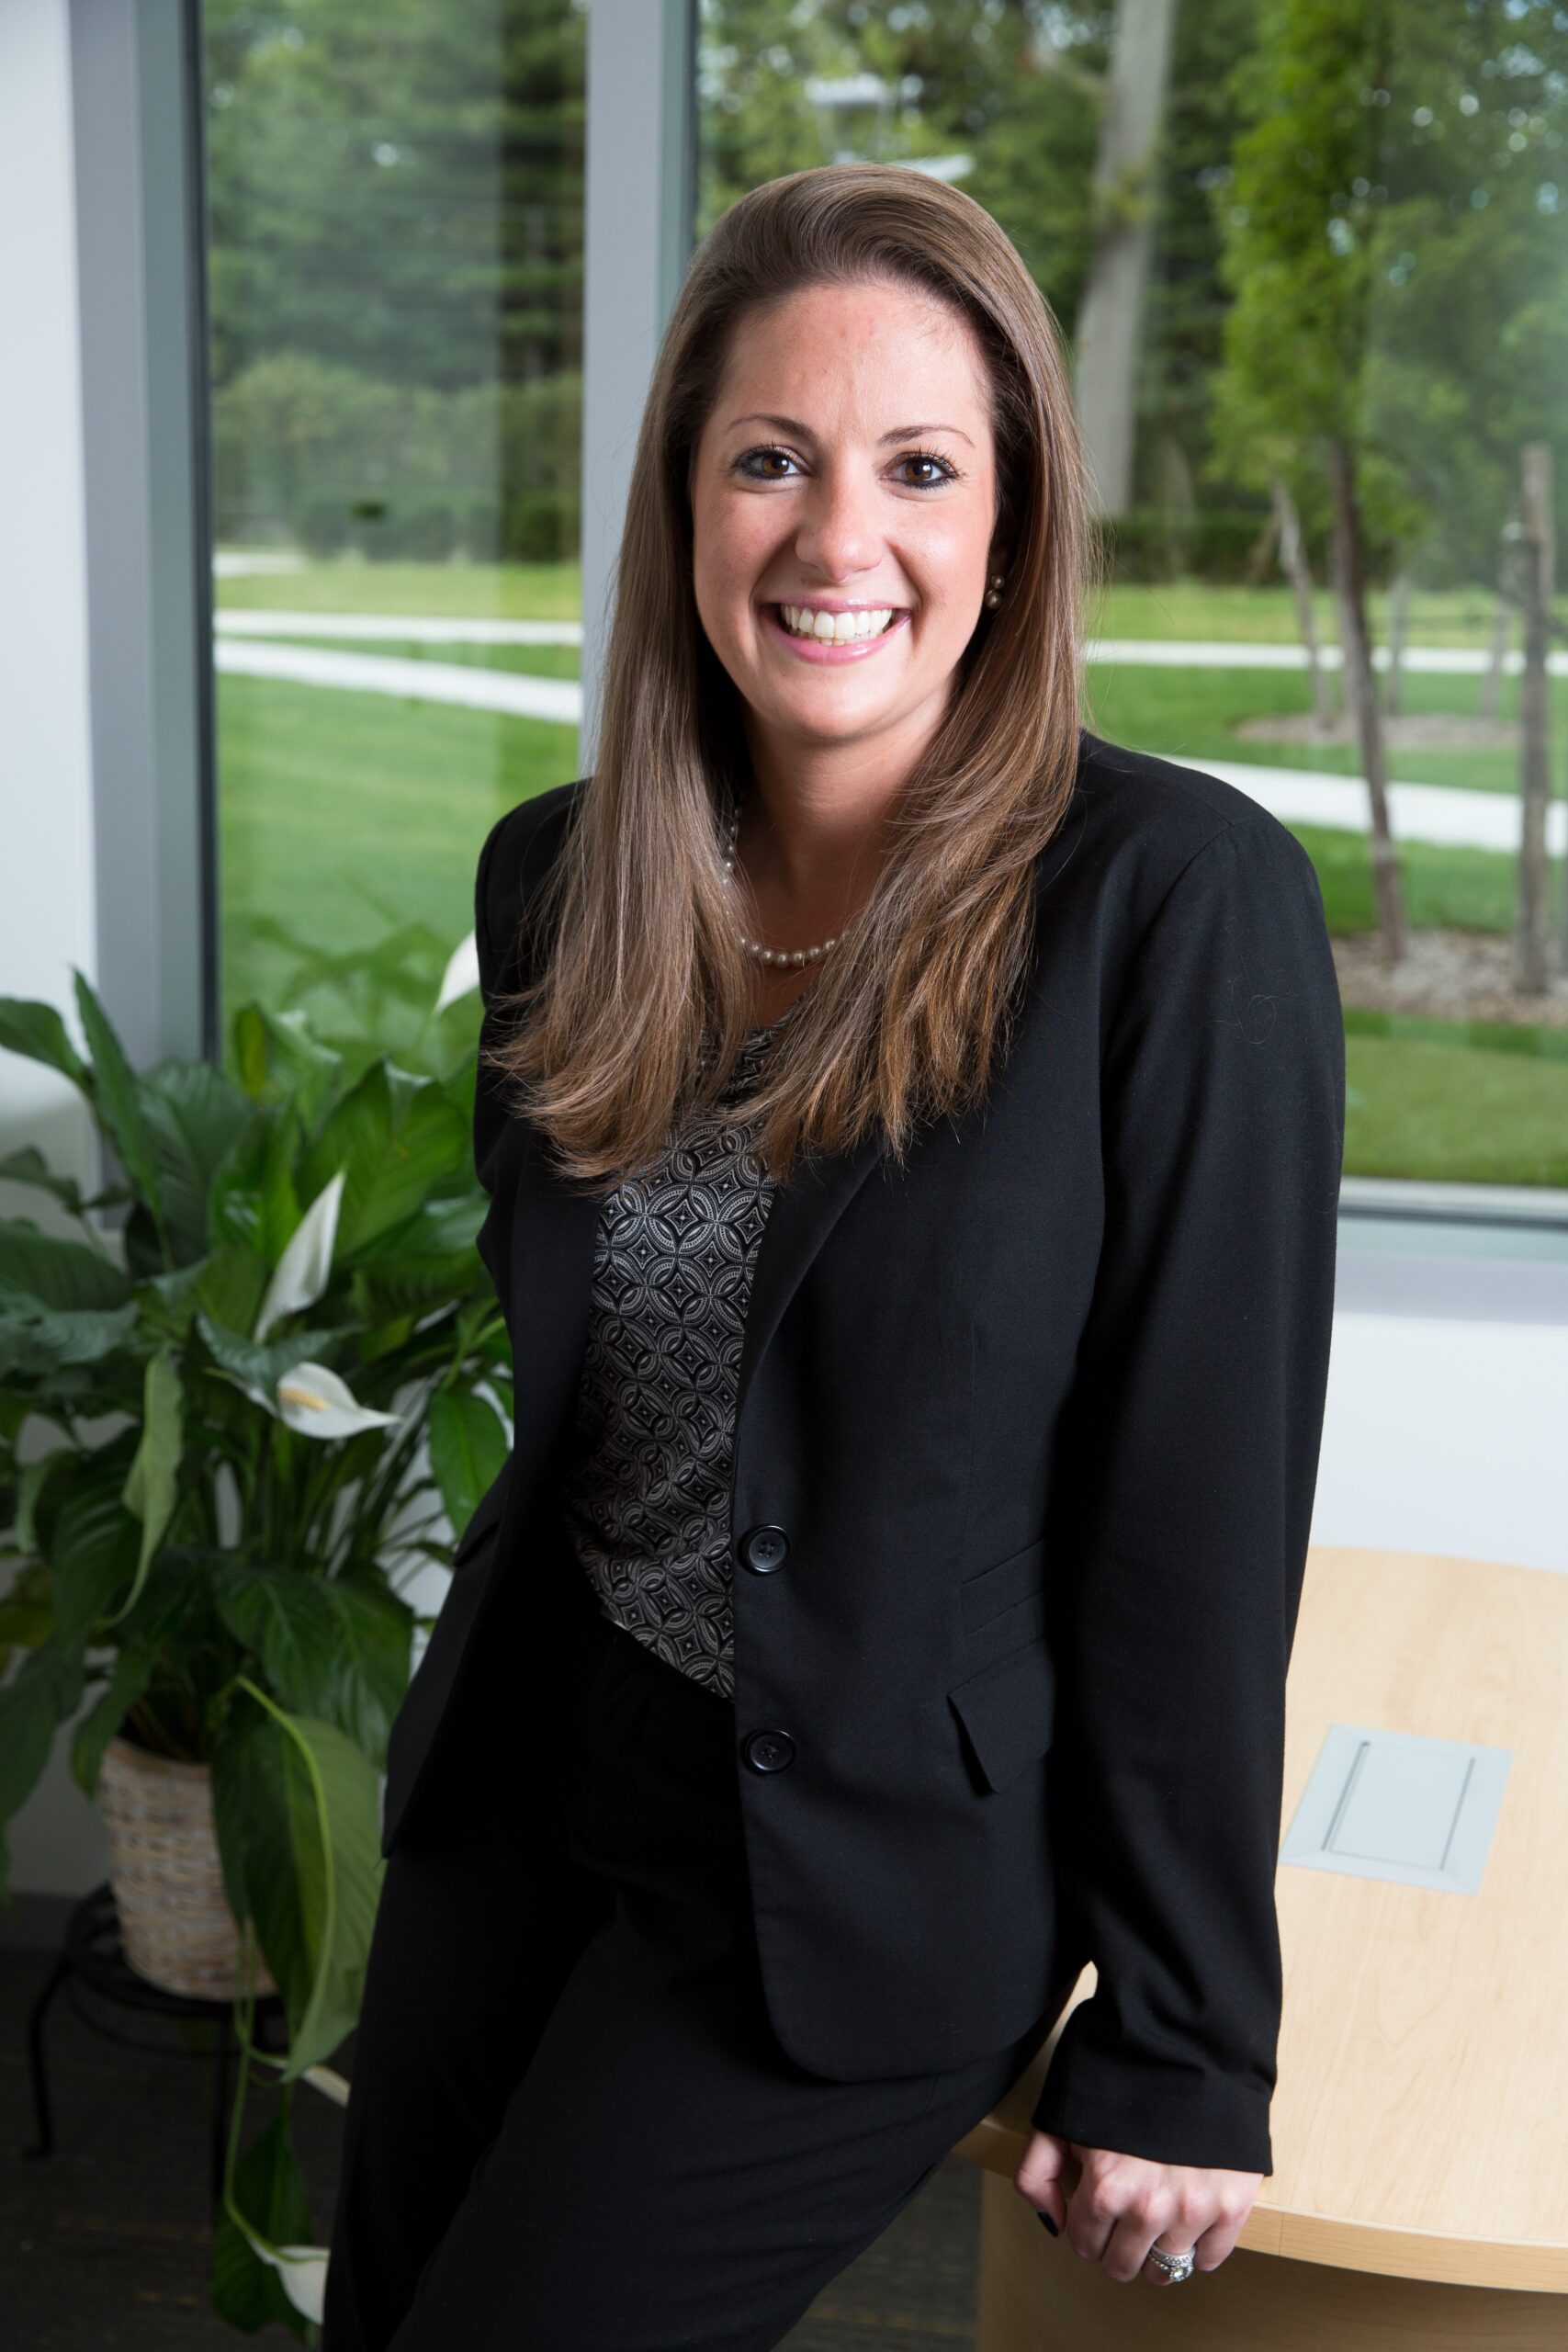 Kristen Capezza is vice president of enrollment and university communications at Adelphi University in New York.